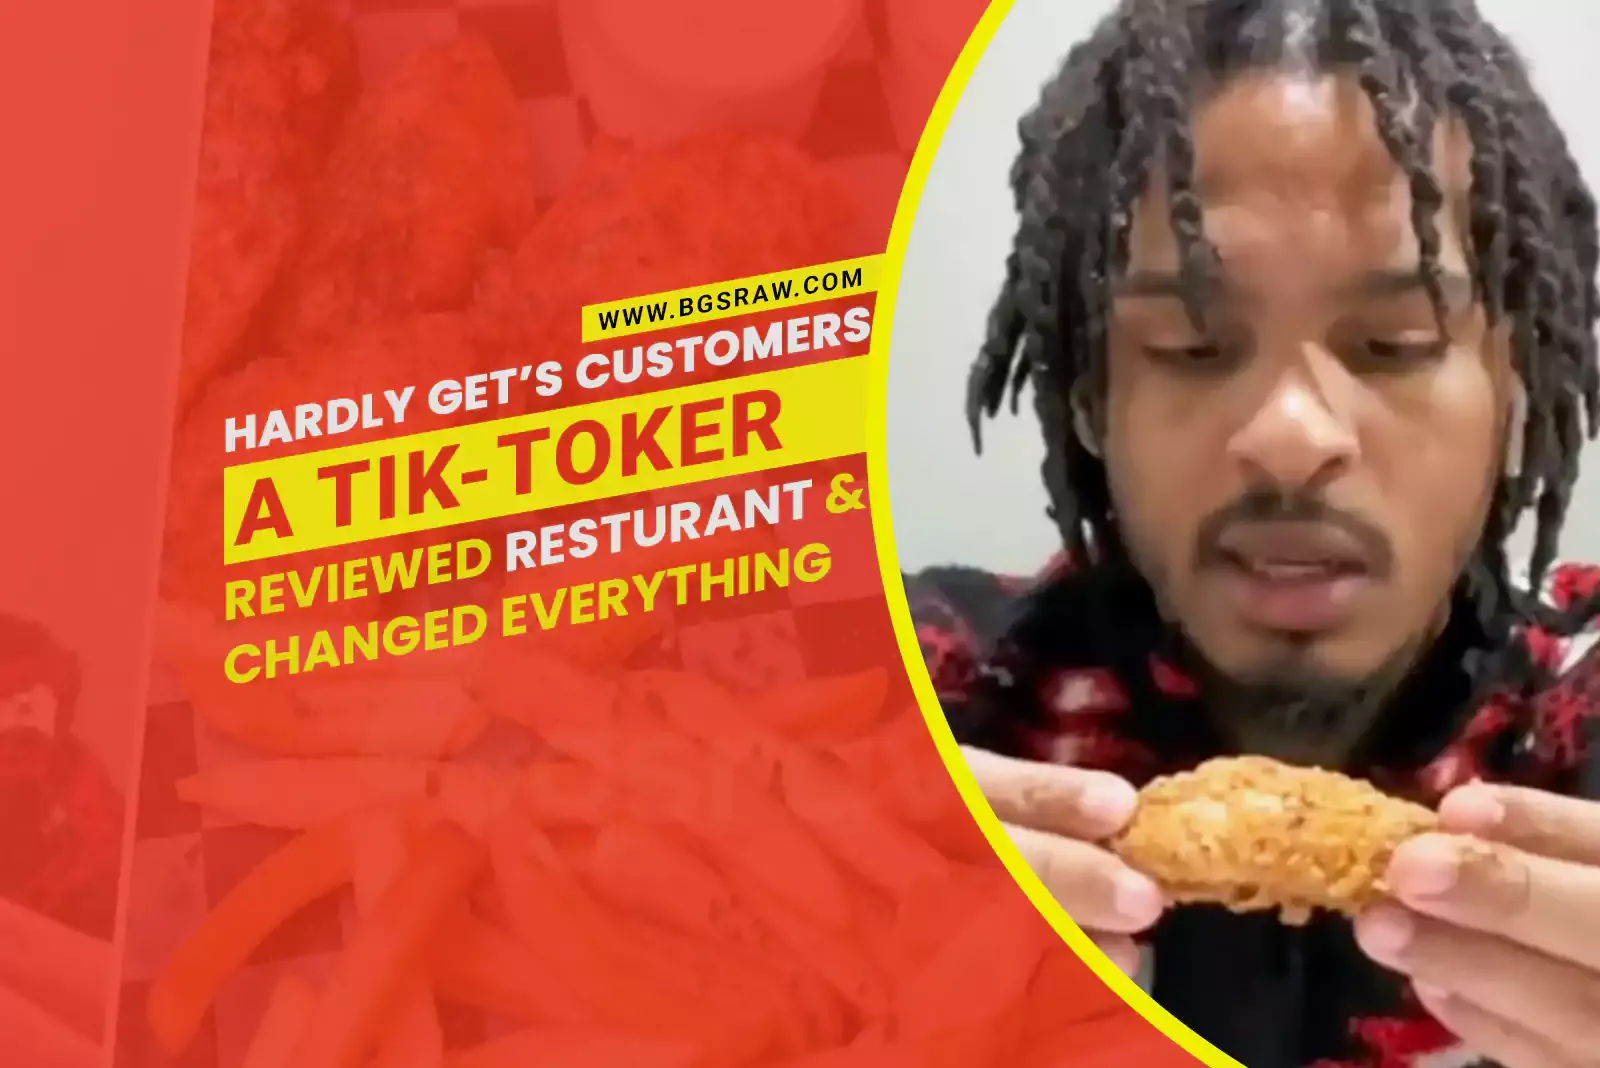 TikToker Influencer changed the restaurant business, the food review changed everything